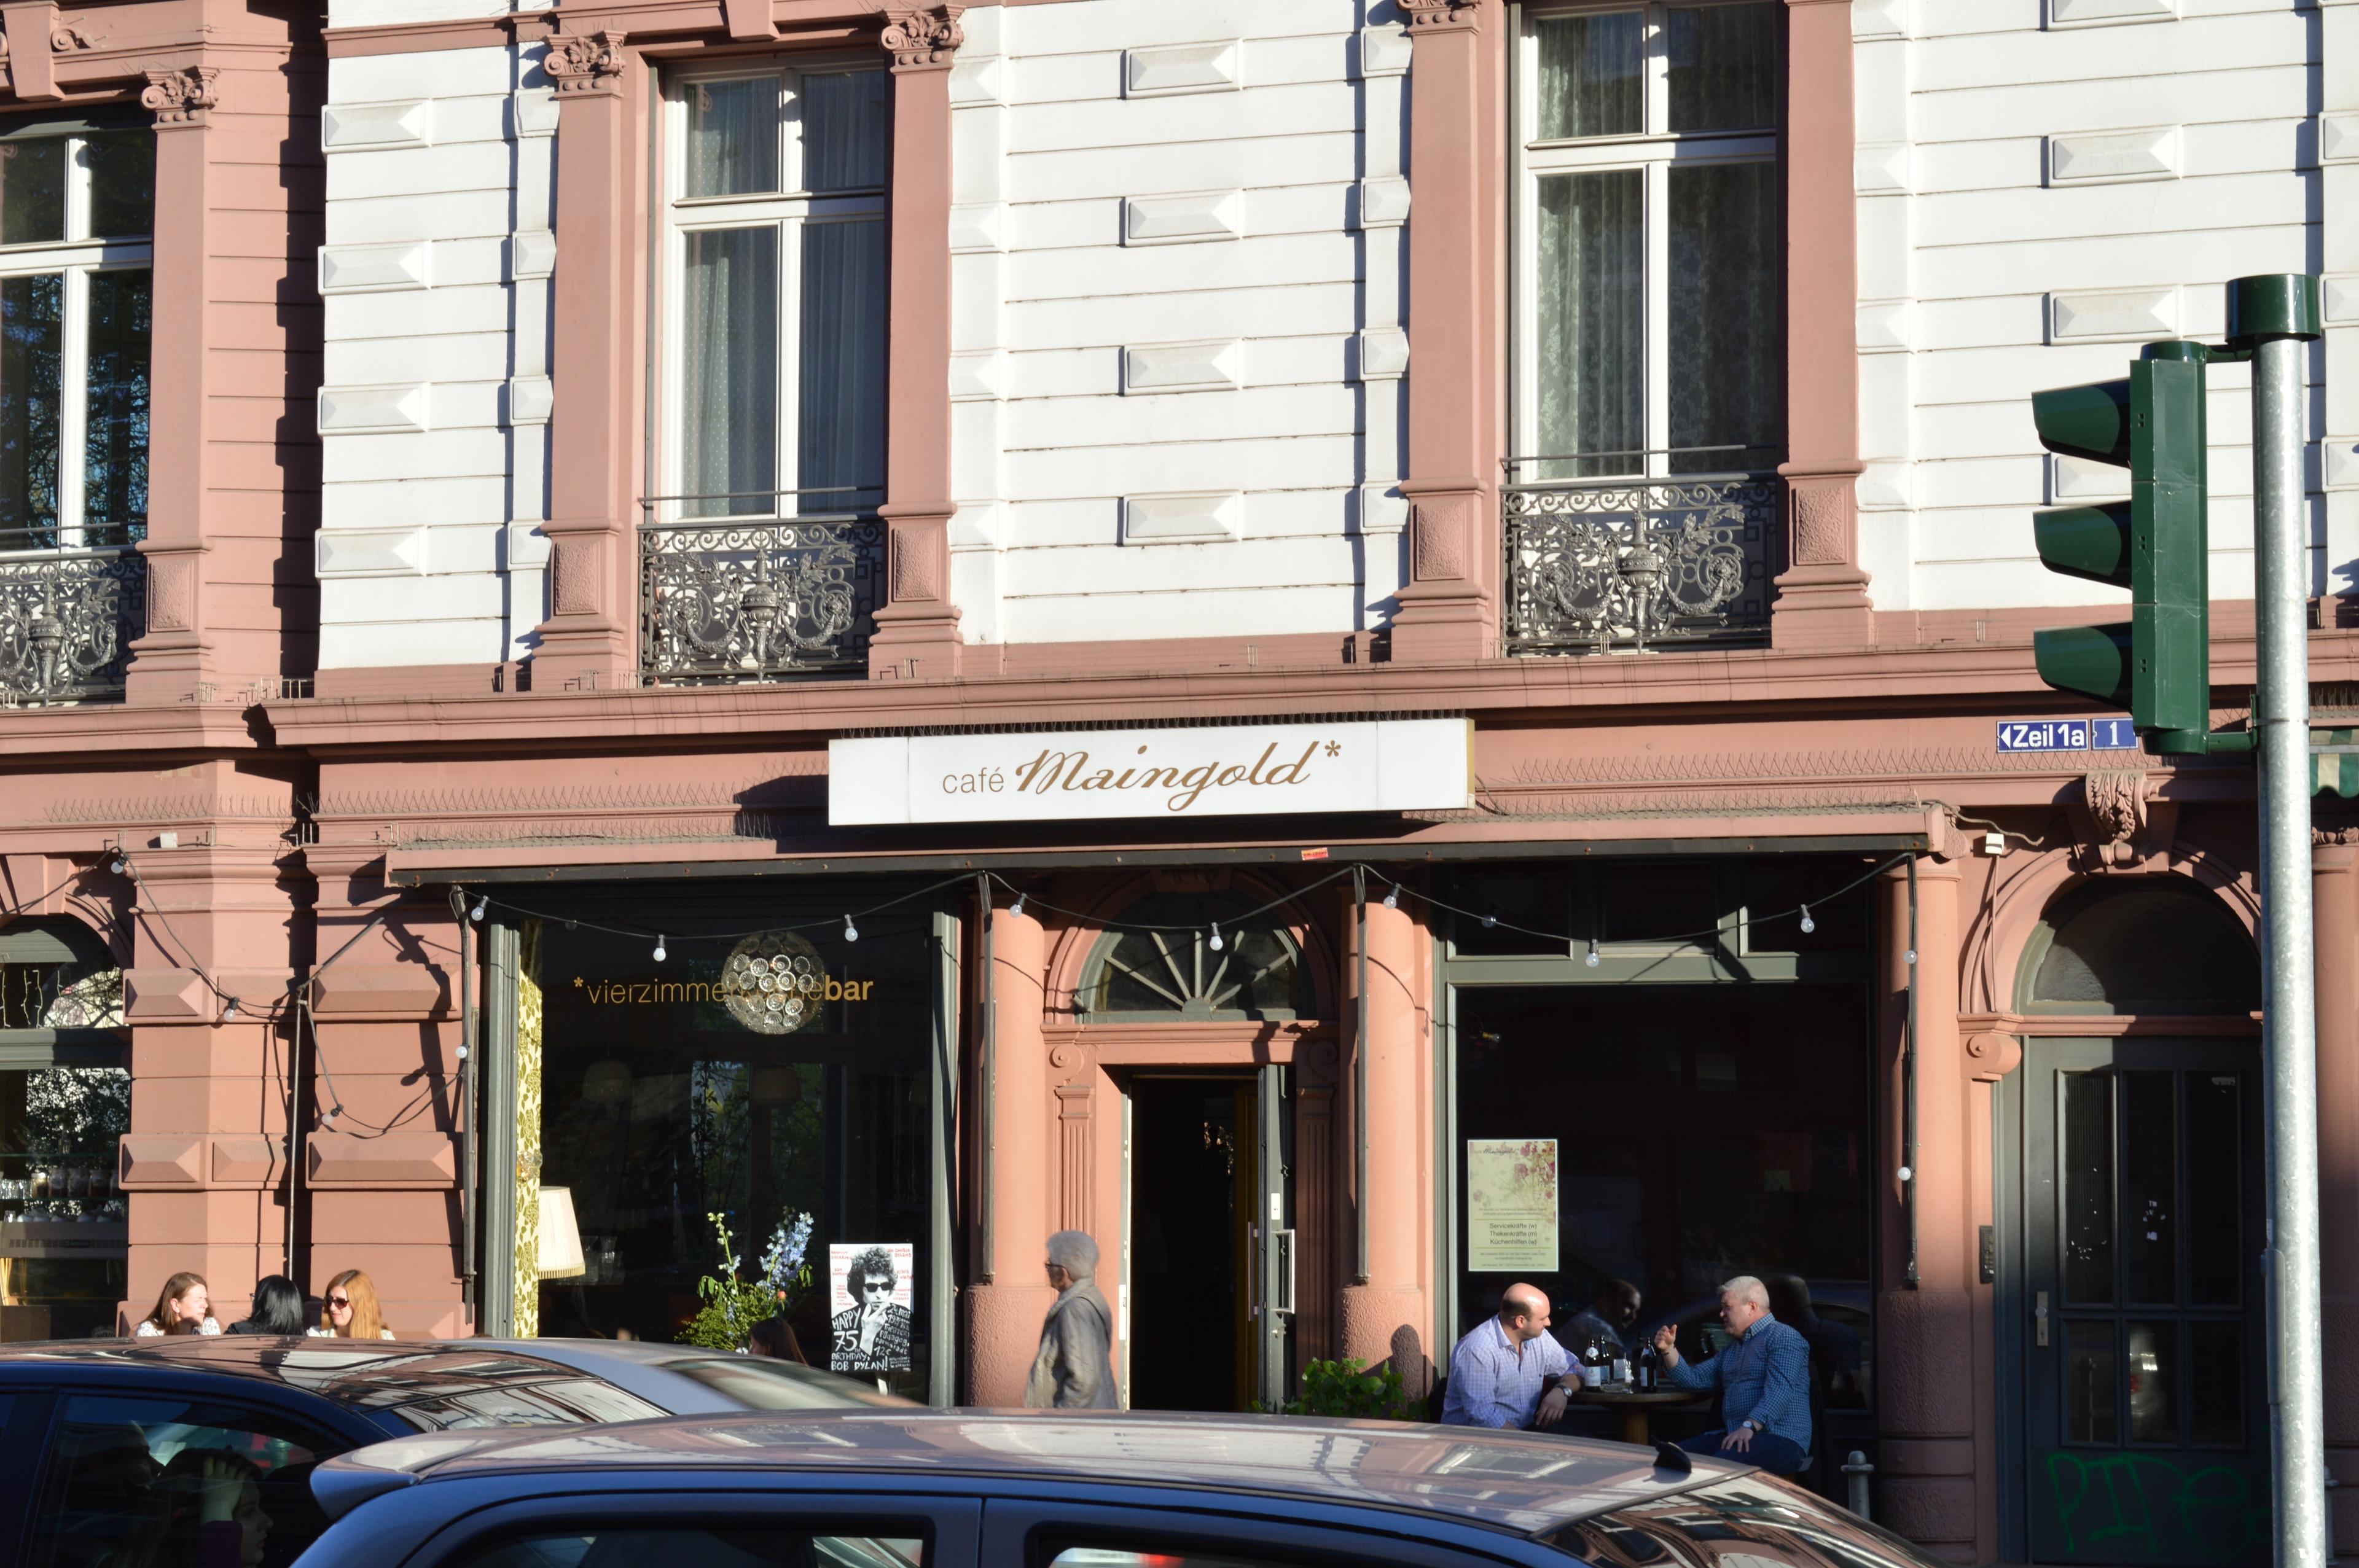 Cover image of this place Café Maingold